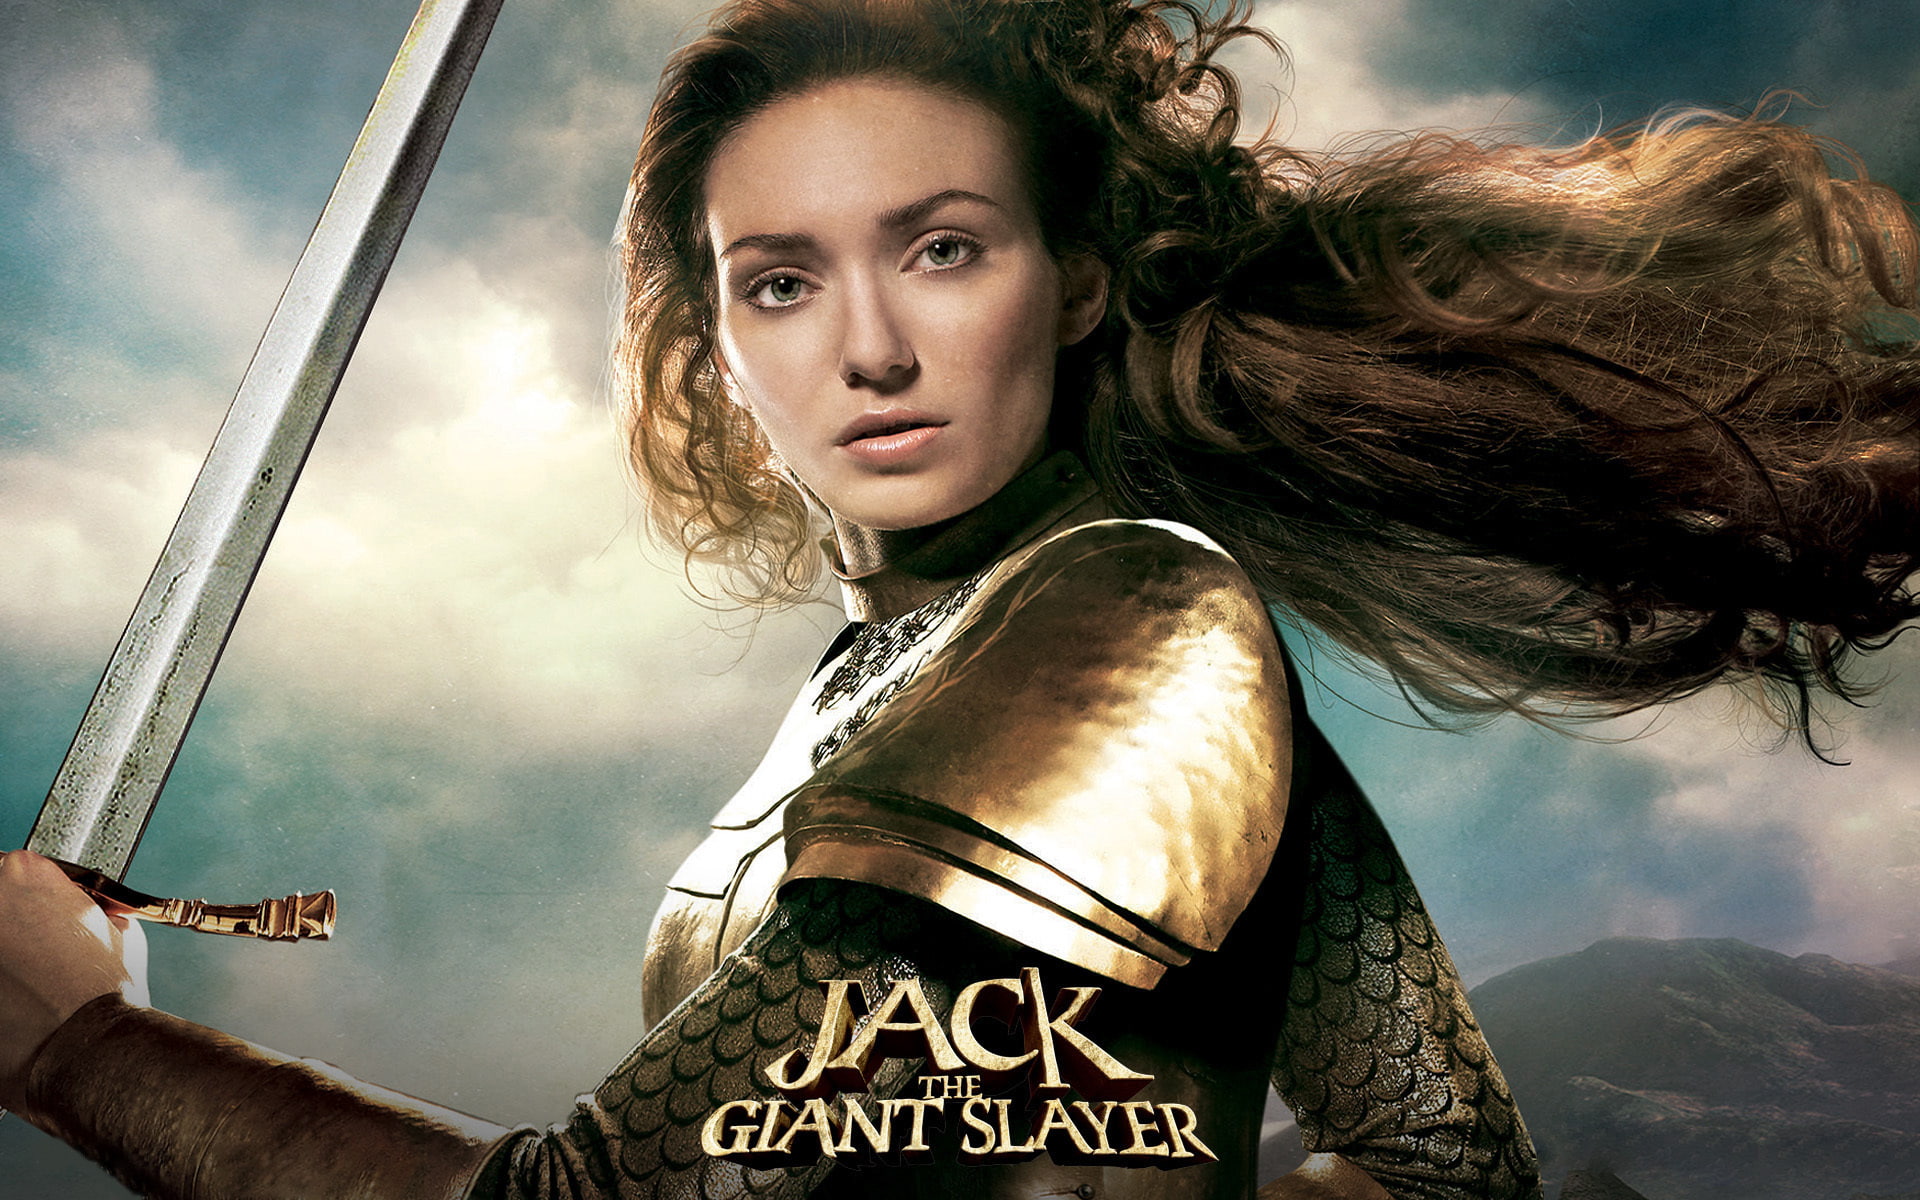 armor, brown, giant, girls, glance, hair, haired, jack, movies